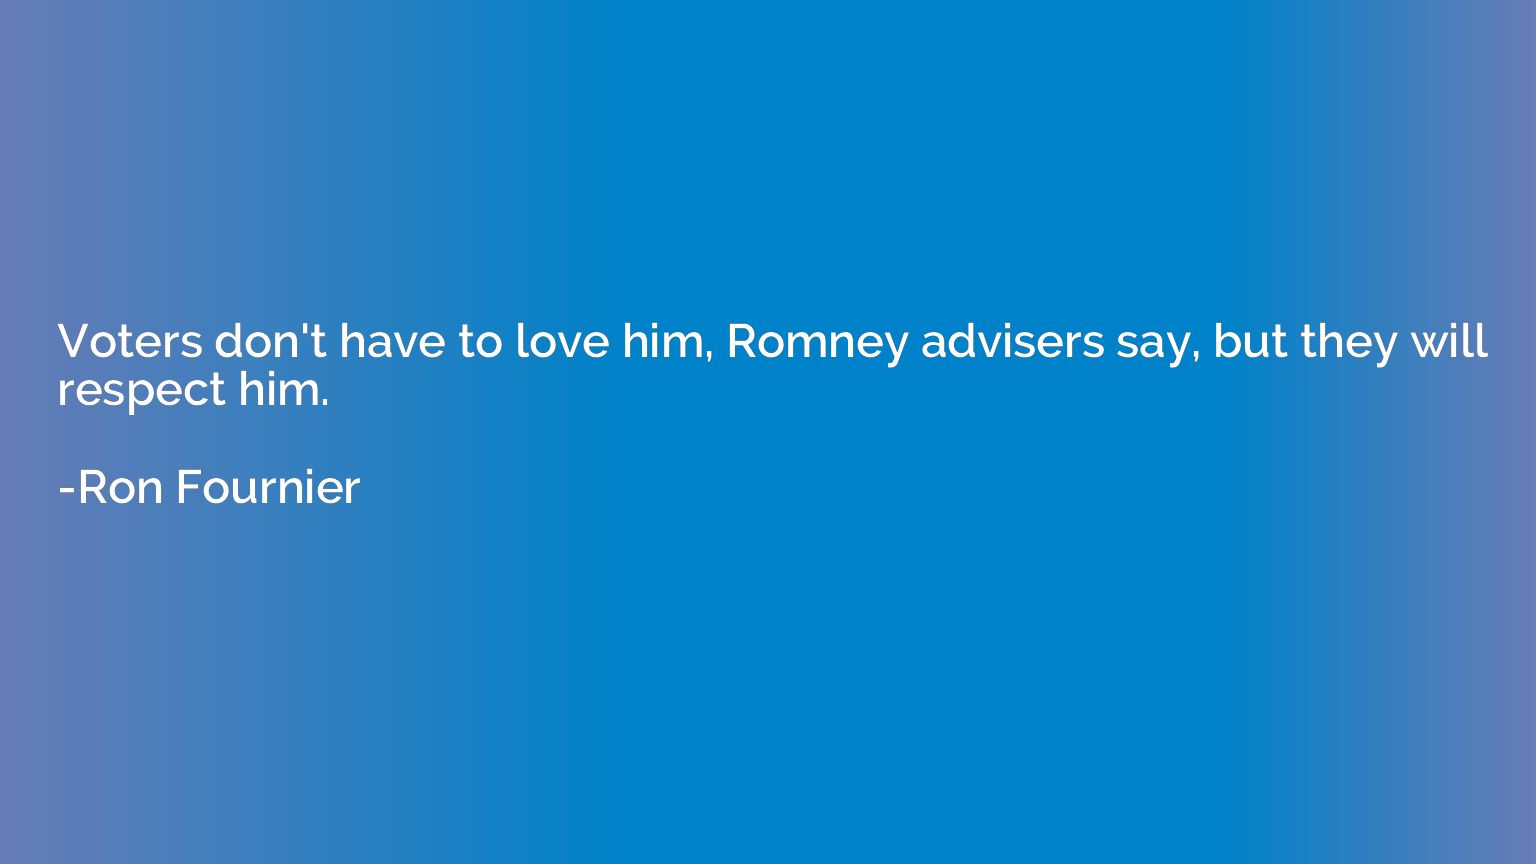 Voters don't have to love him, Romney advisers say, but they